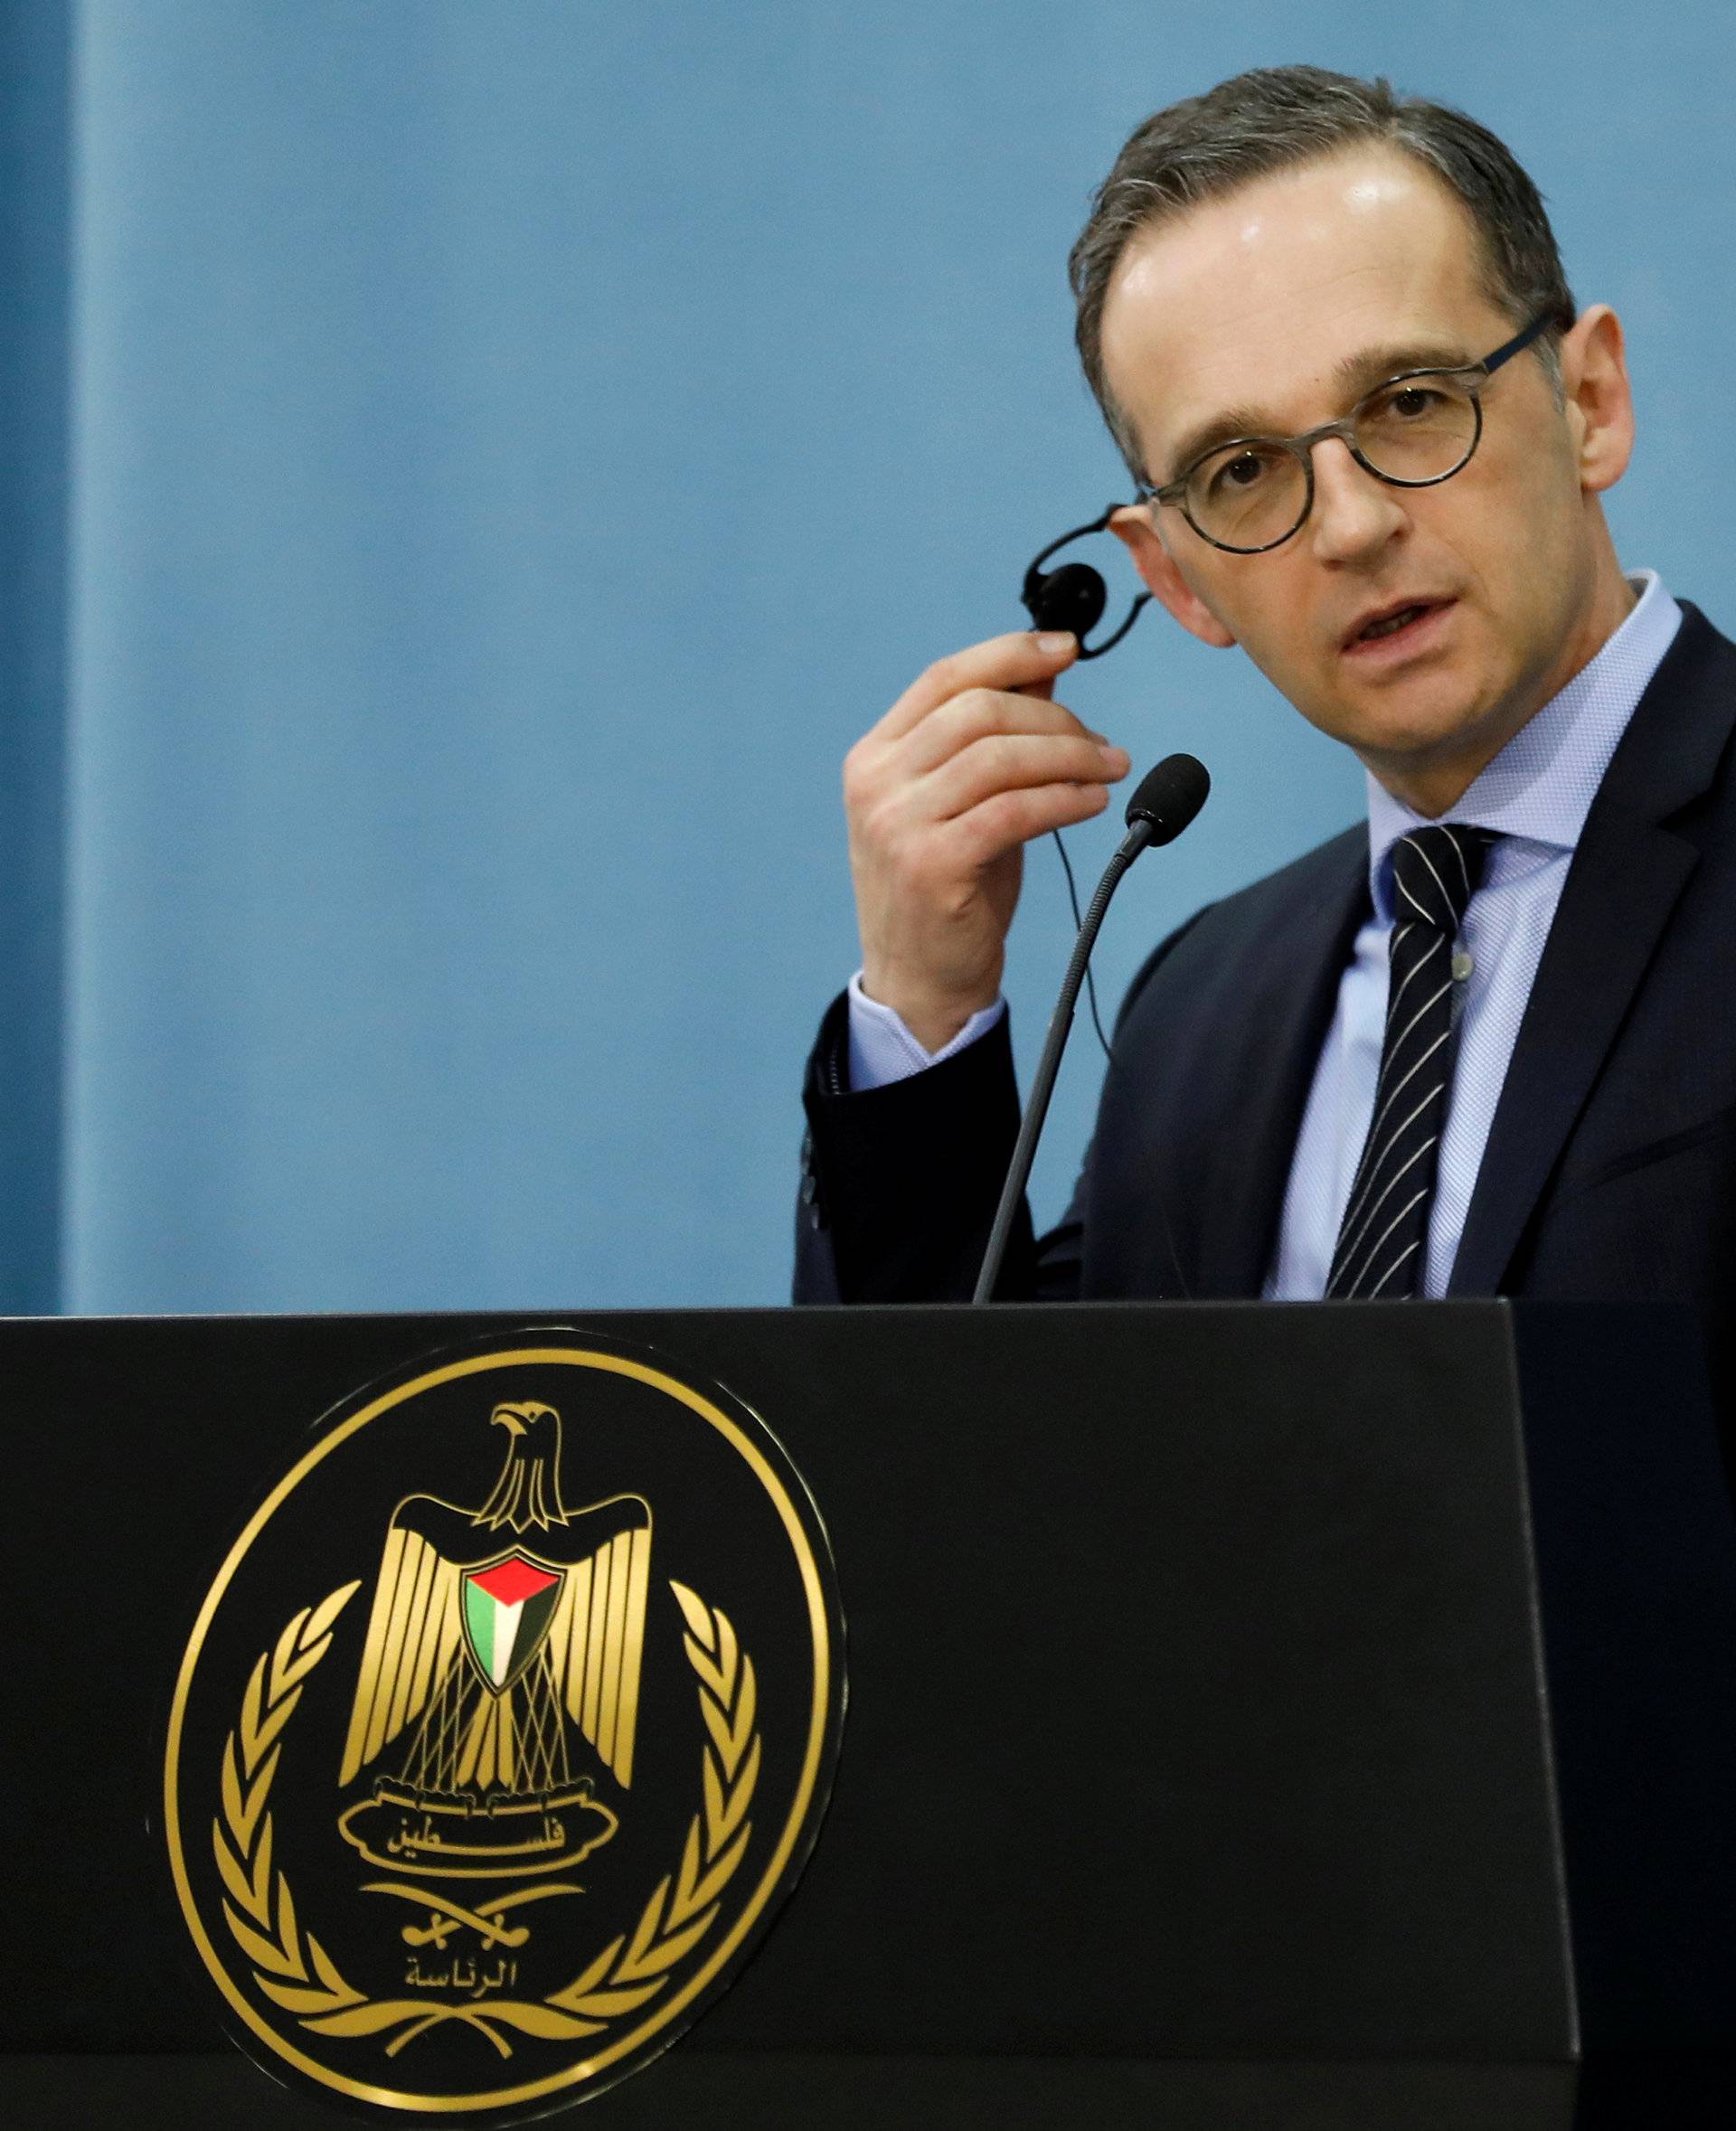 German FM Heiko Maas listens during a news conference with Palestinian FM Al Maliki in Ramallah, in the occupied West Bank